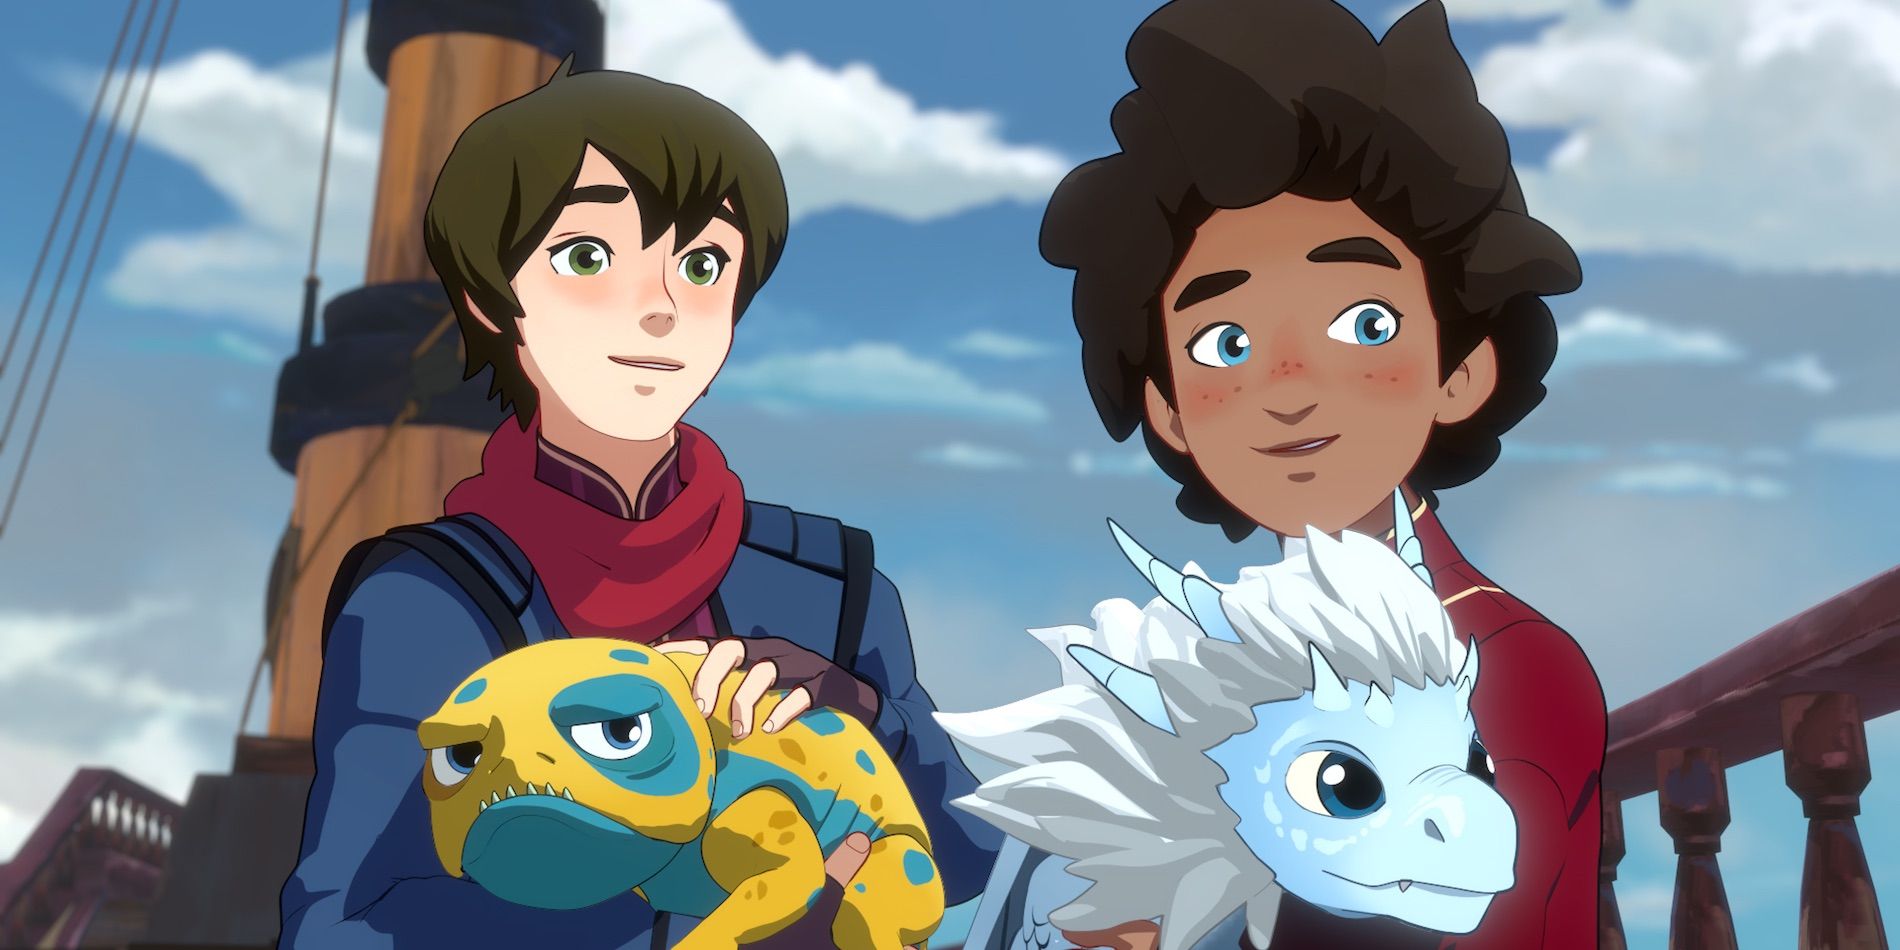 What To Expect From The Dragon Prince Season 3